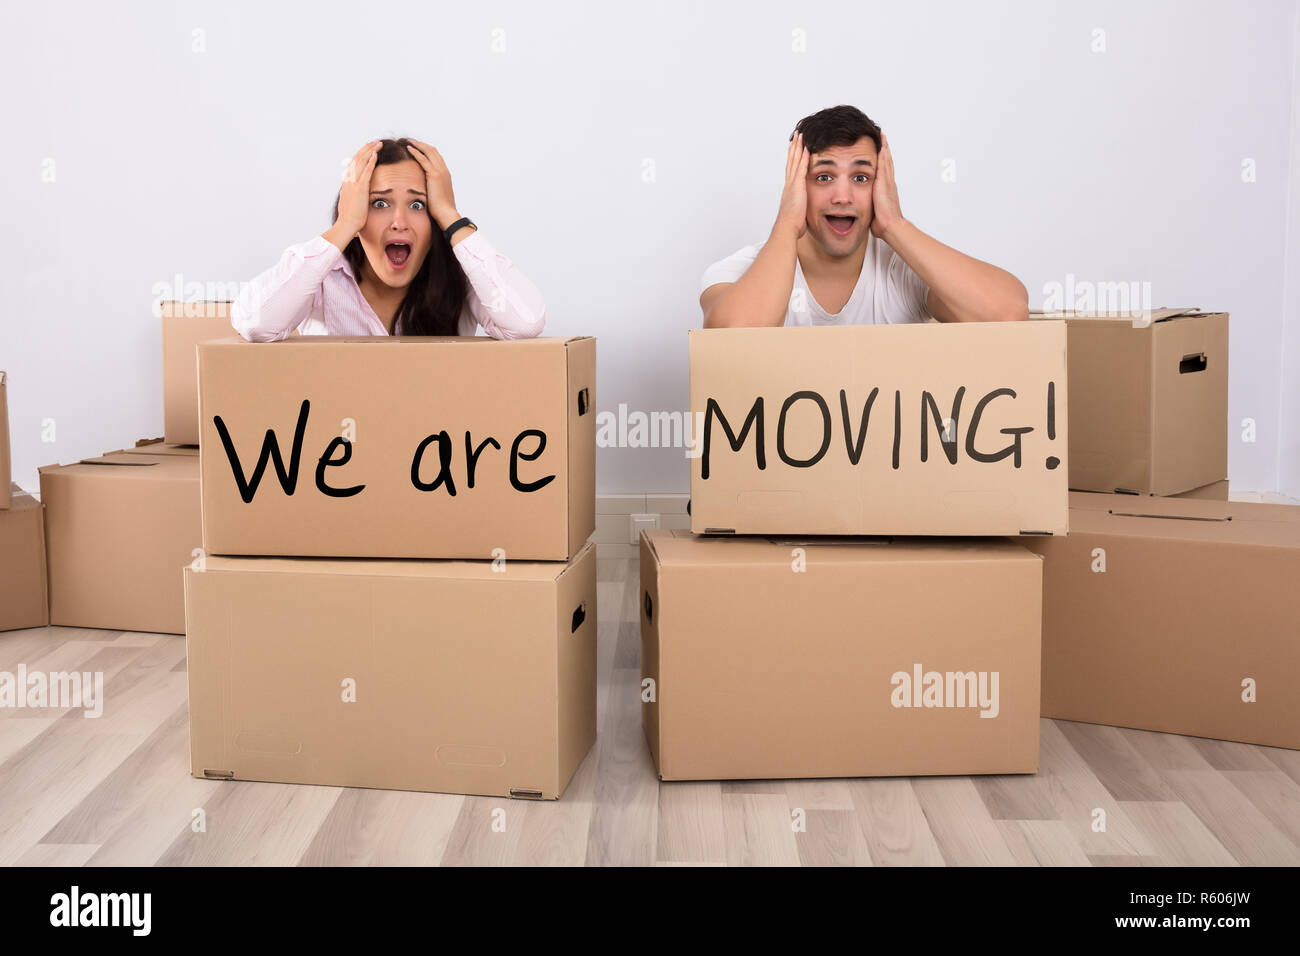 Couple Screaming Behind The Cardboard Boxes Stock Photo